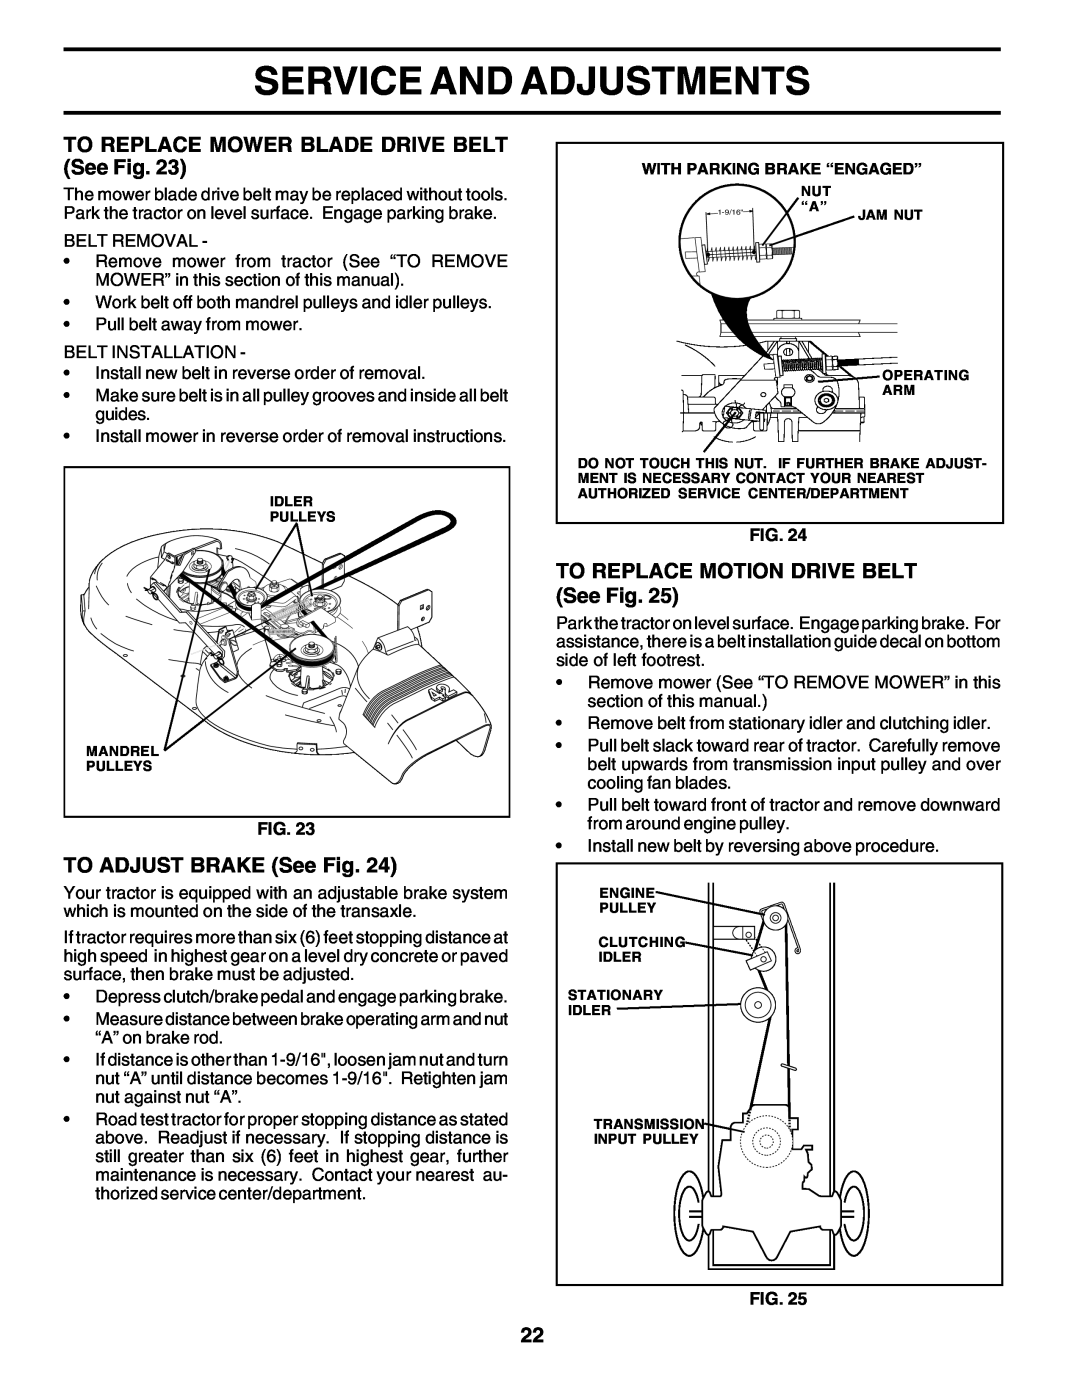 Poulan 180002 owner manual Service And Adjustments, TO REPLACE MOWER BLADE DRIVE BELT See Fig, TO ADJUST BRAKE See Fig 